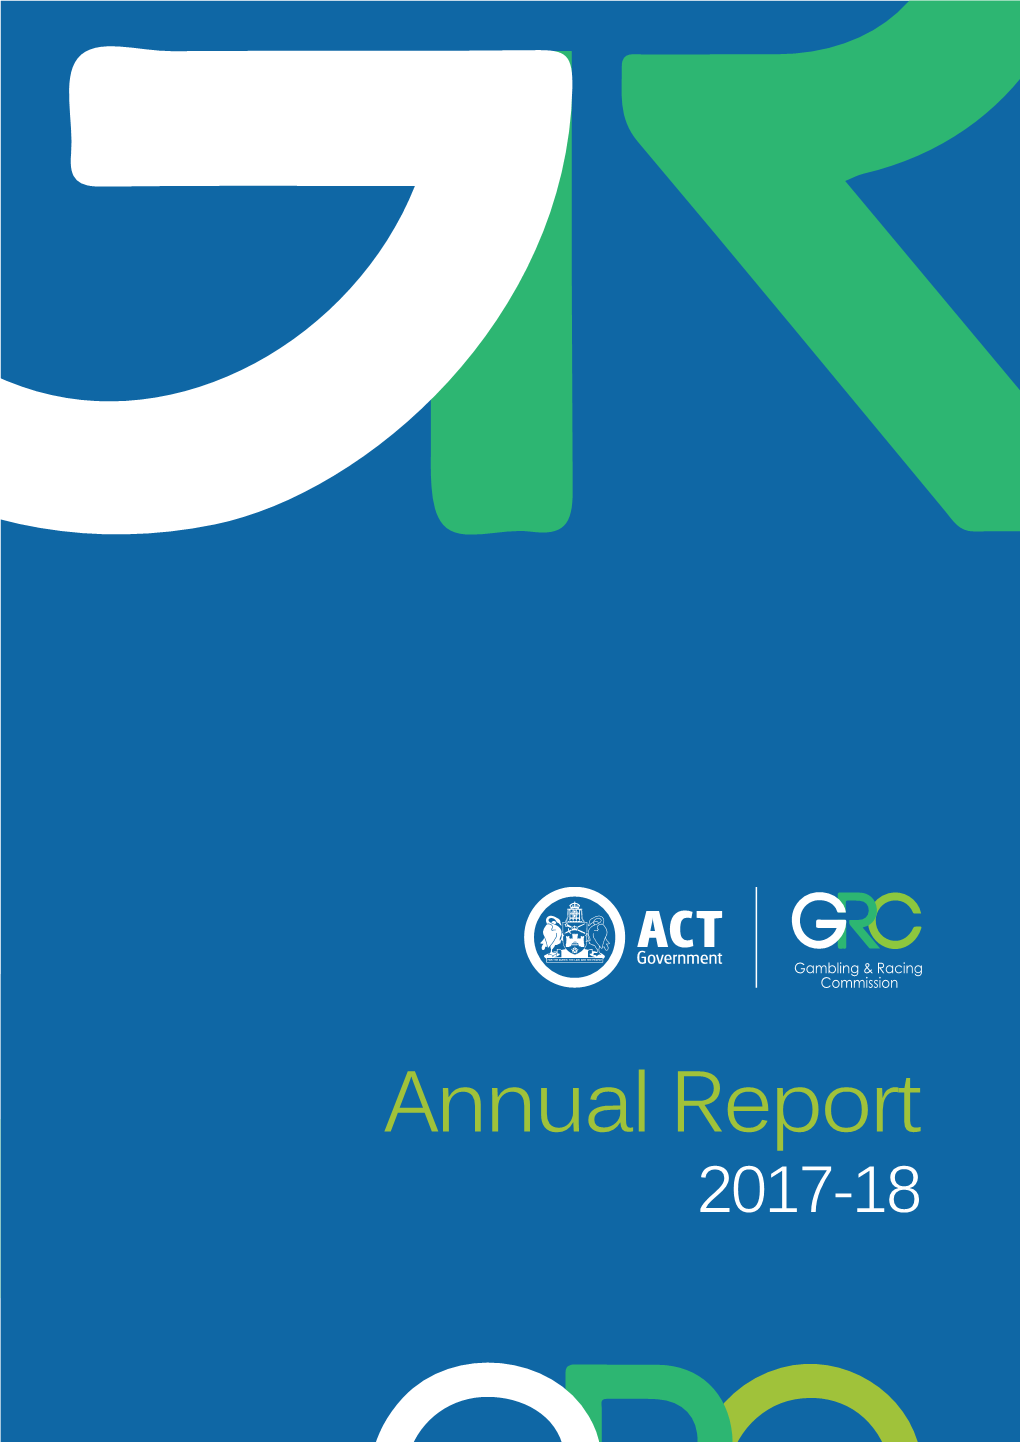 ACT Gambling and Racing Commission Annual Report 2017-18